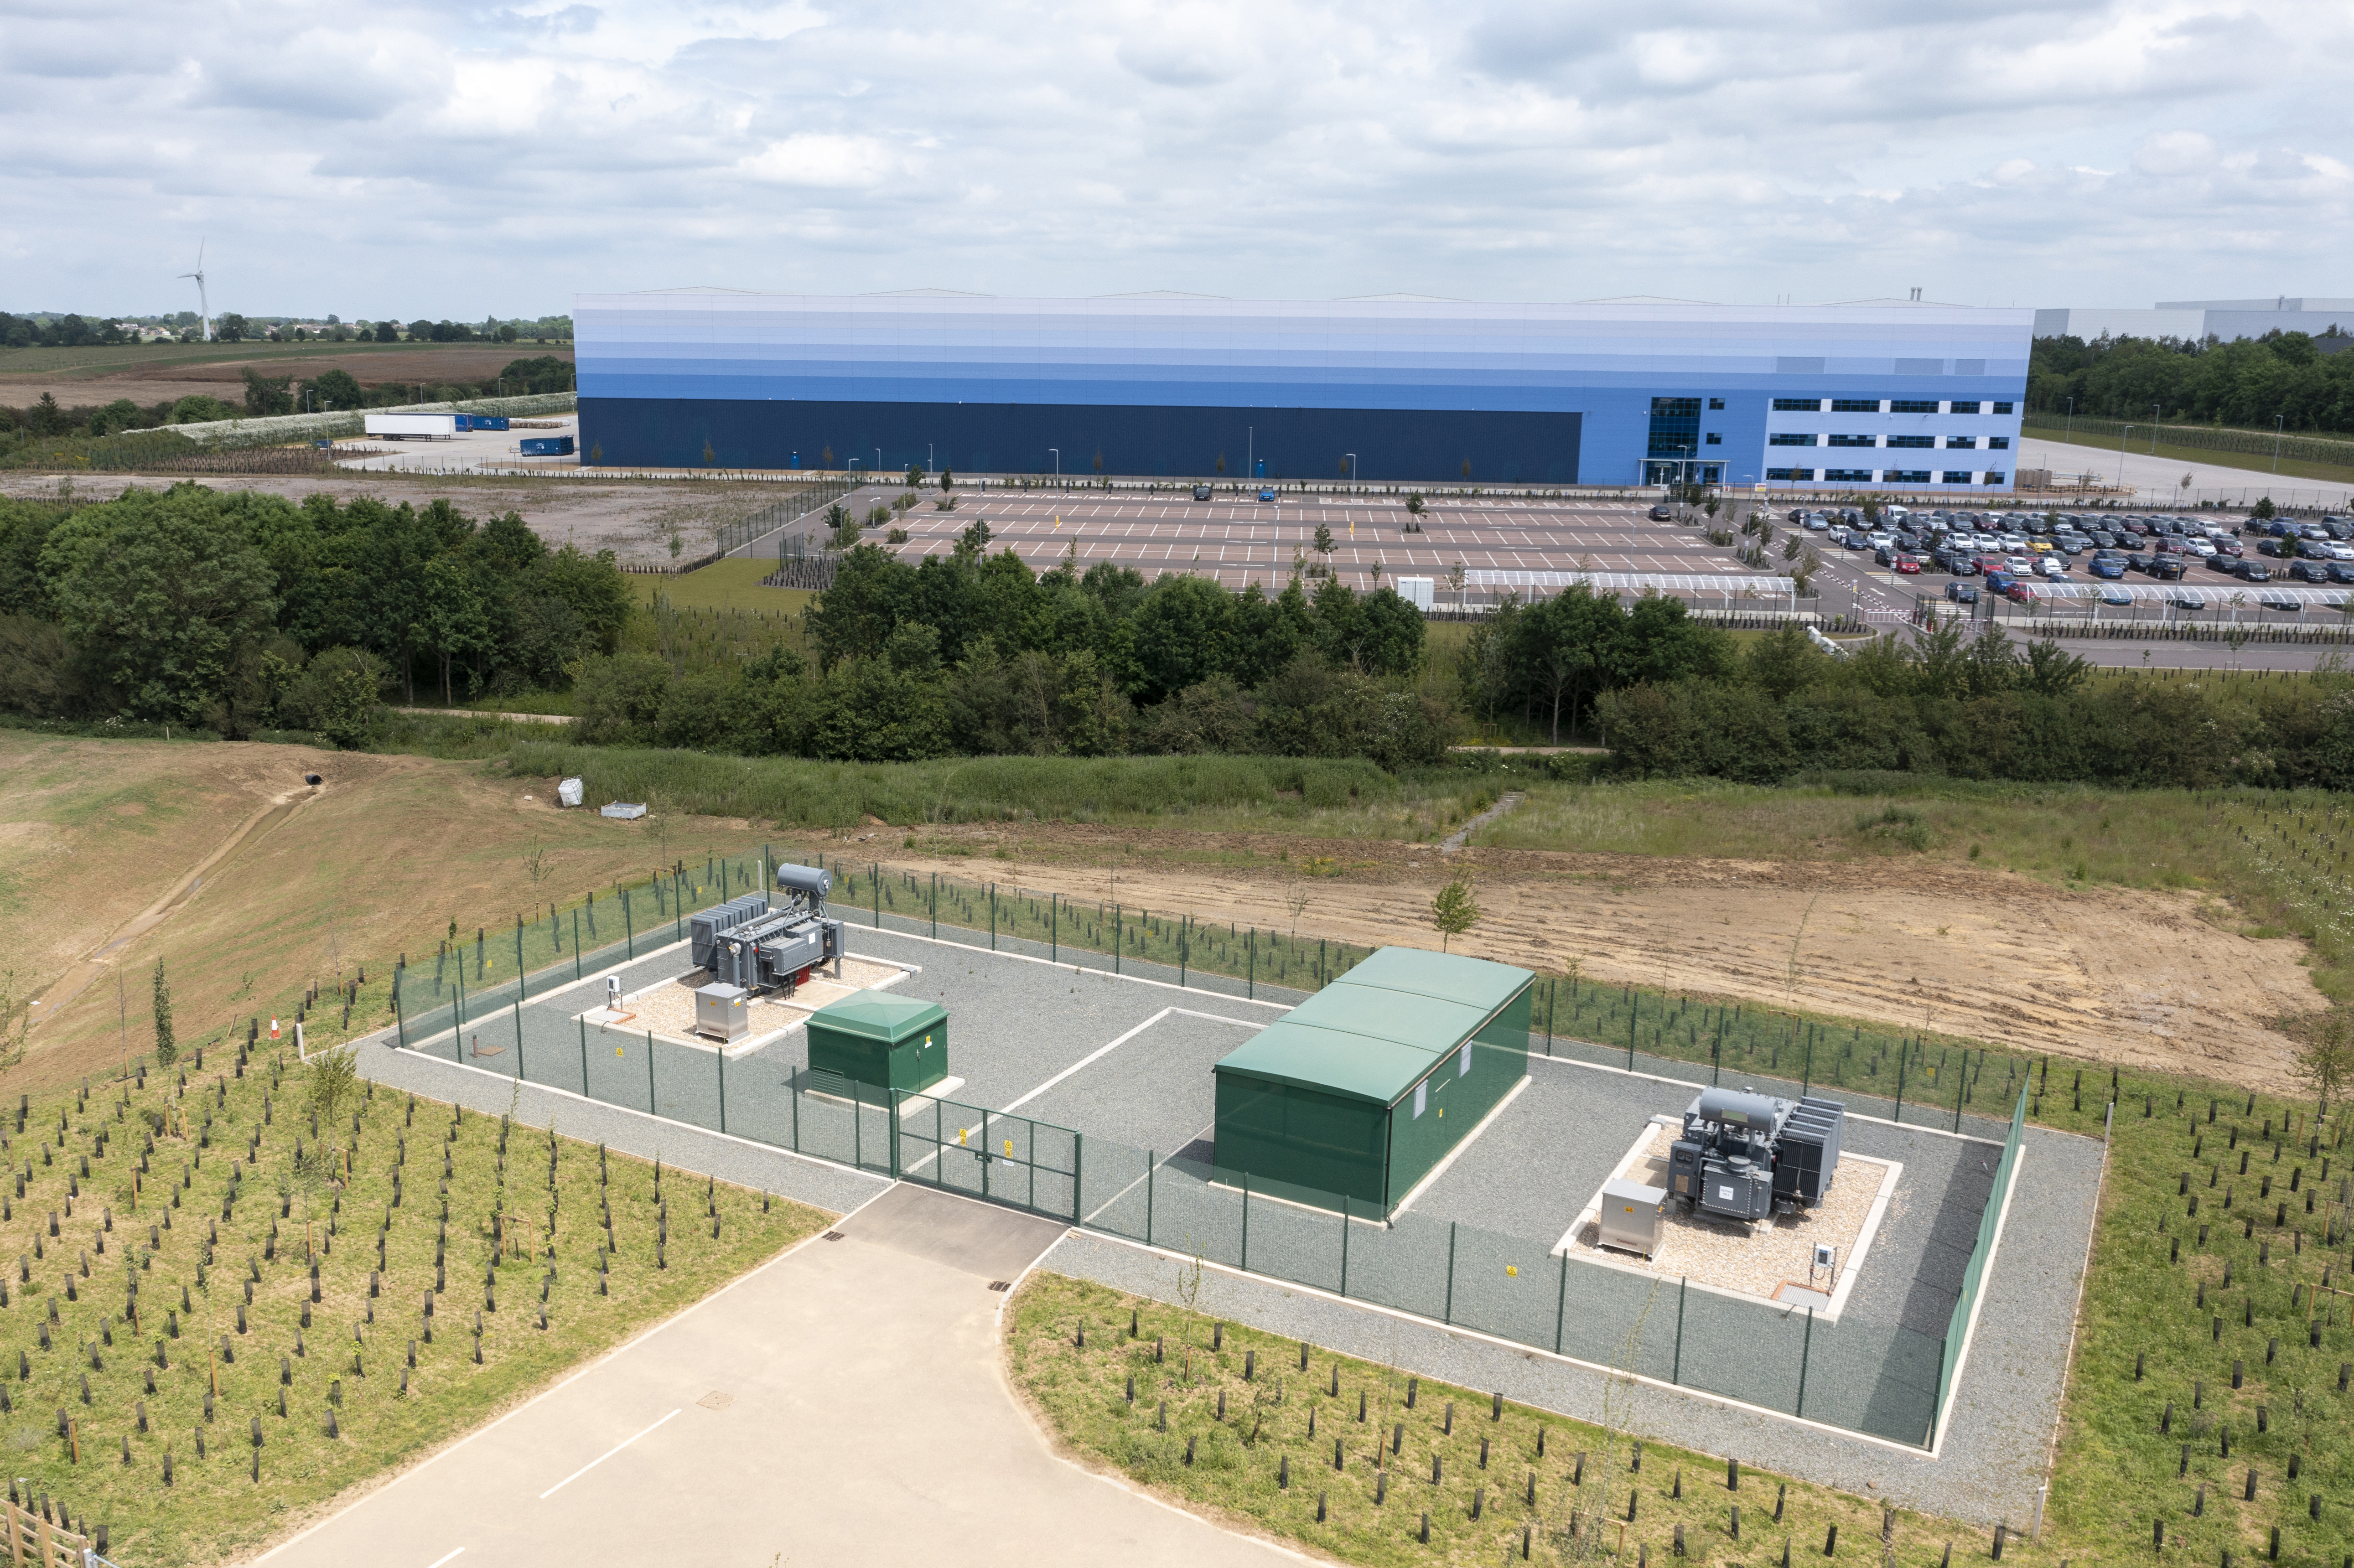 Continuously Evolving the Plan on a Primary Substation at Magna Park